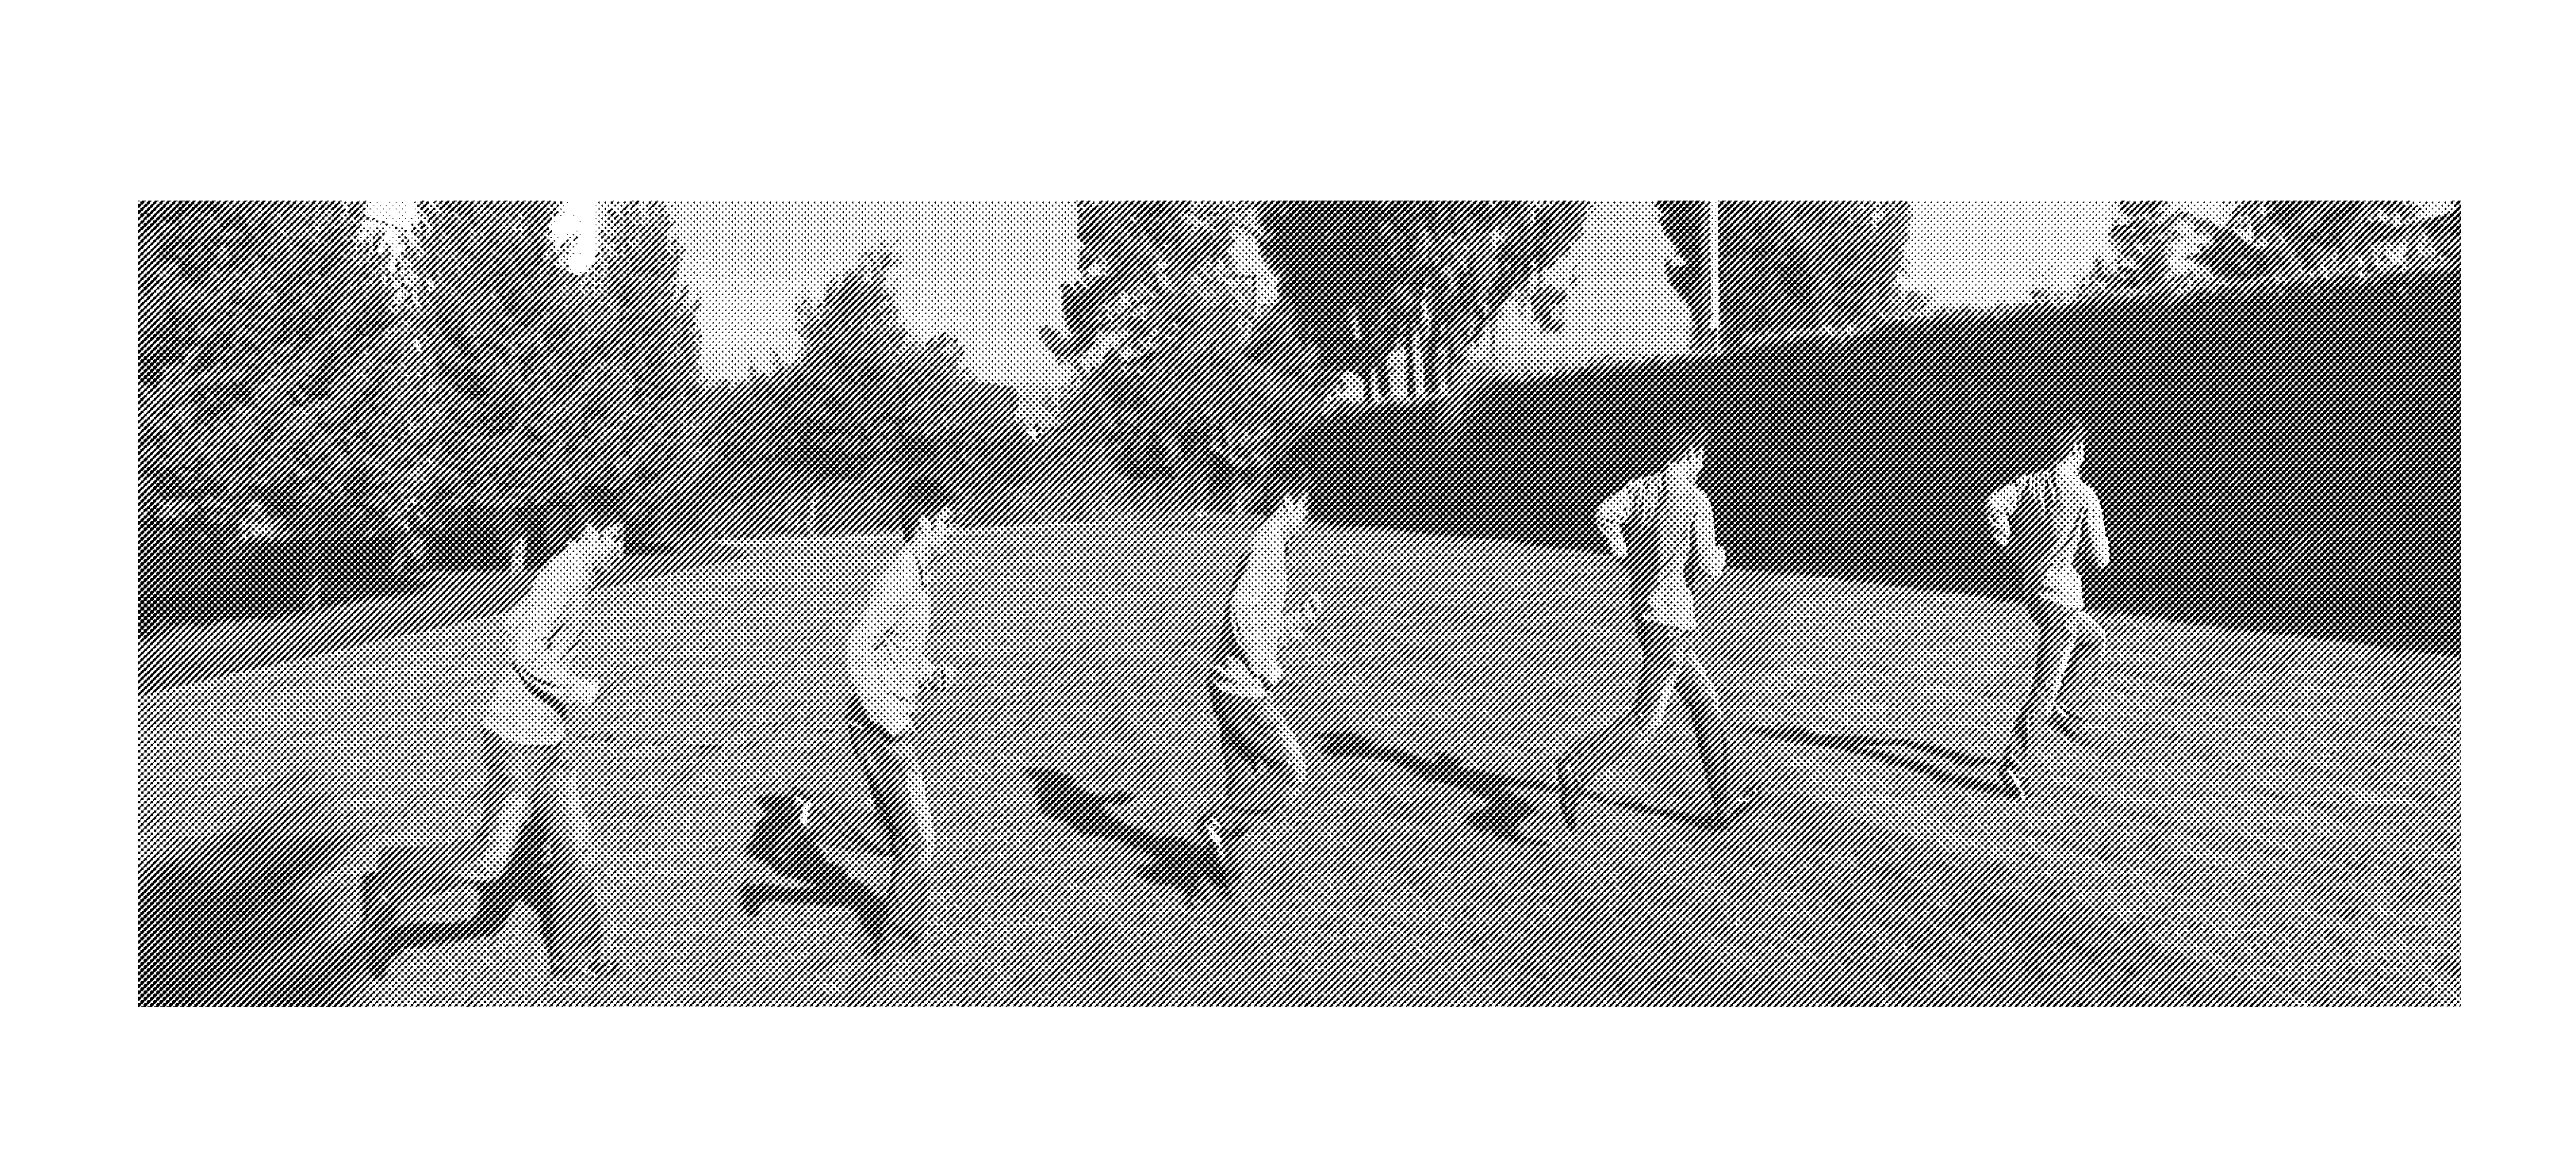 Tail the motion method of generating simulated strobe motion videos and pictures using image cloning